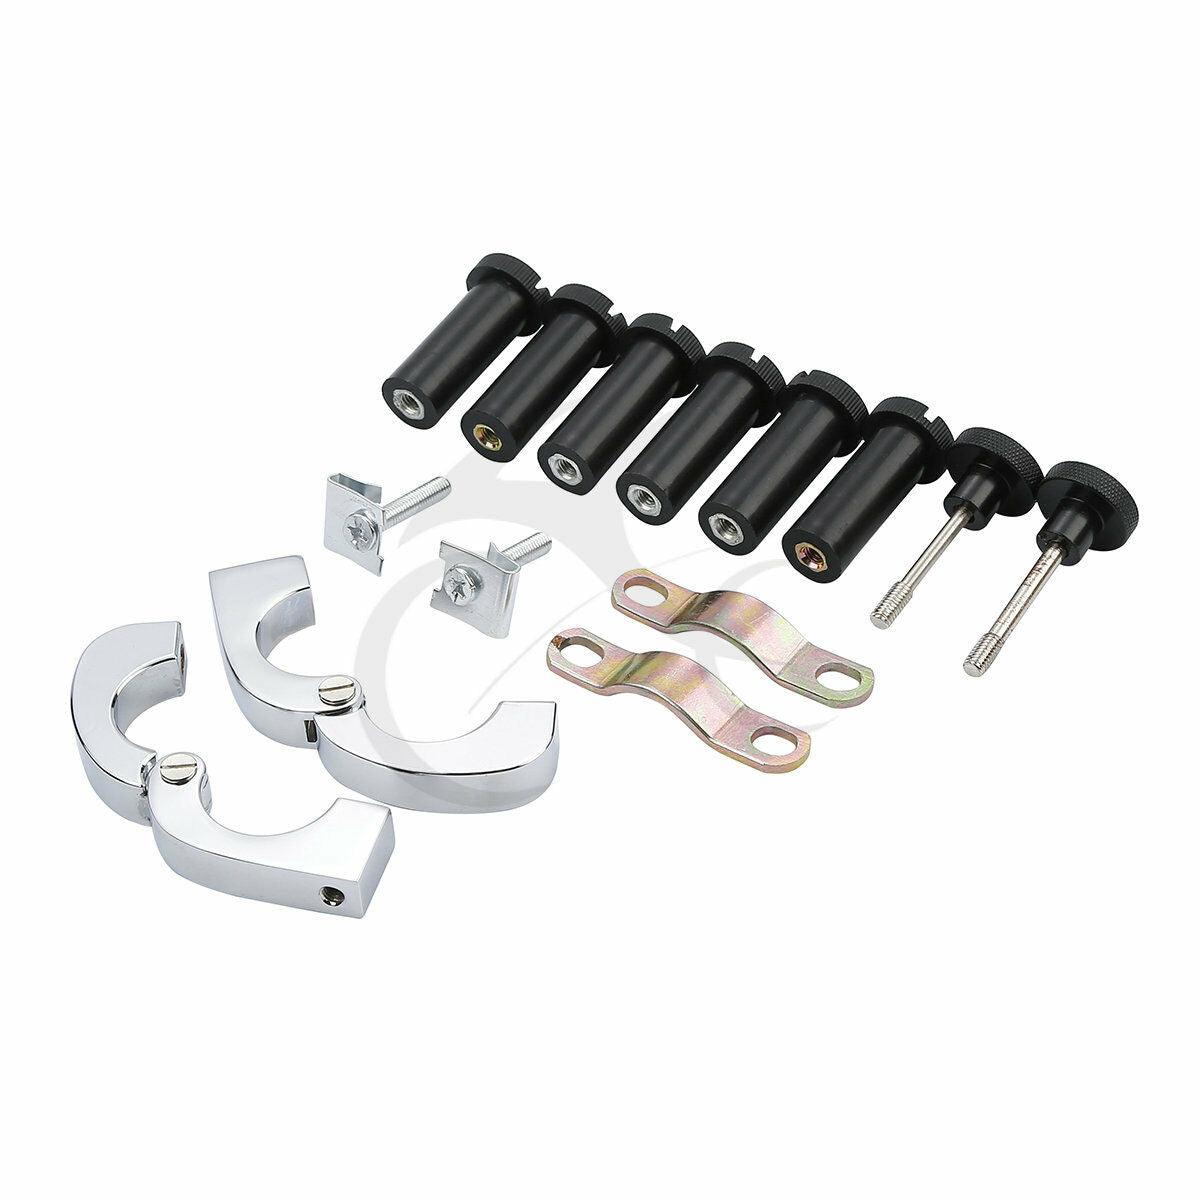 Lower Vented Fairing Mounting Hardware Kit Fit For Harley Street Glide 2014-2022 - Moto Life Products